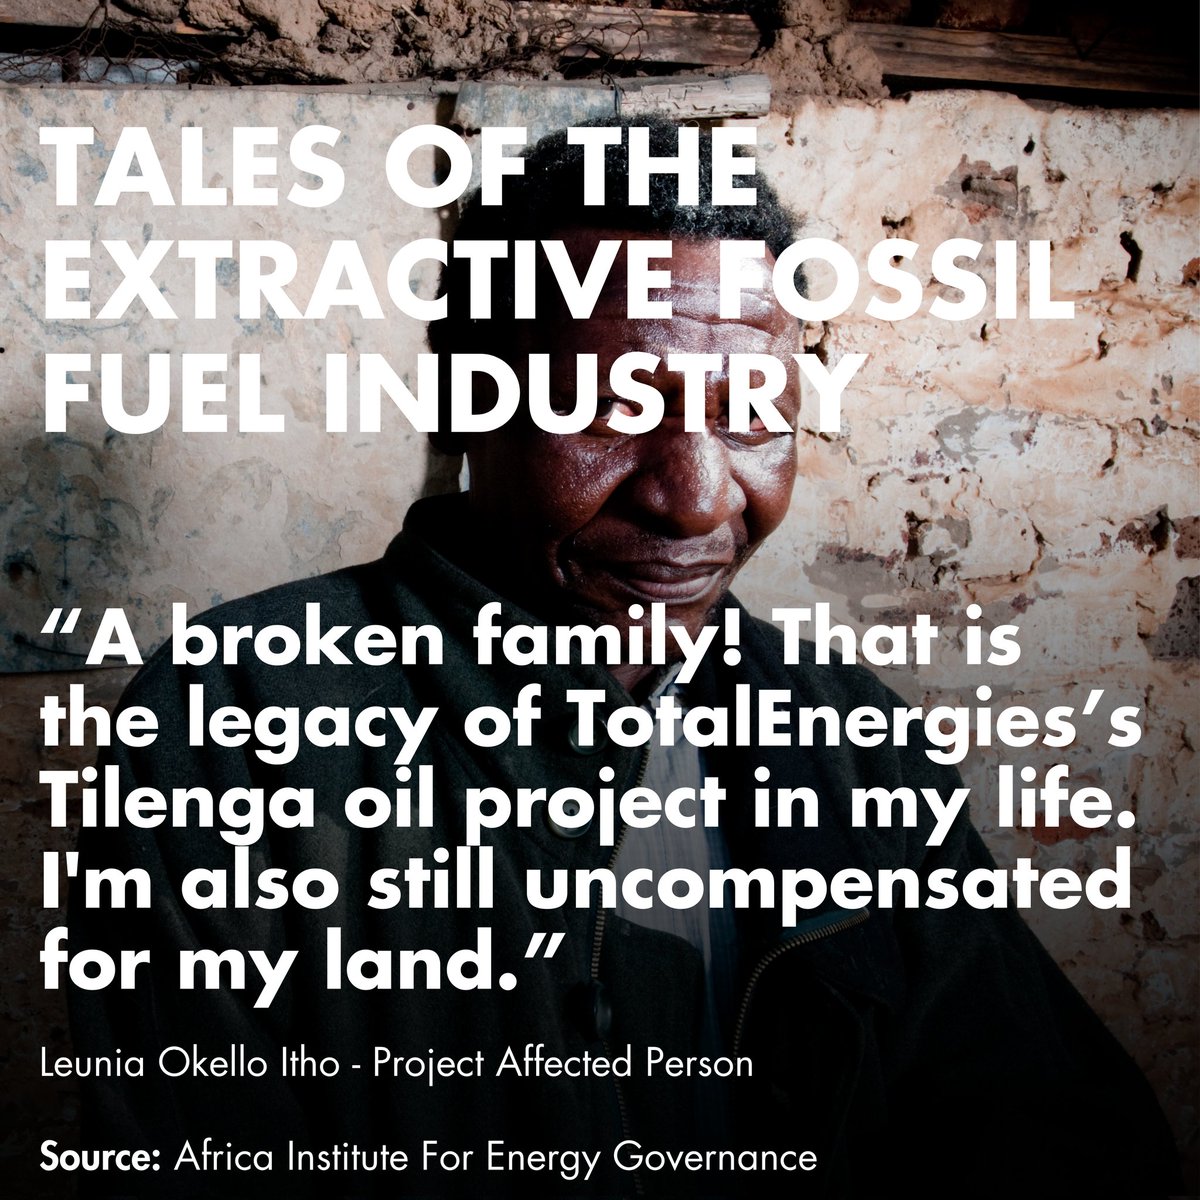 🚫 A broken family with no hope. #100YearsOfClimateDamage #CenturyOfClimateChaos #STOPTOTAL #EndFossilFuels @TotalEnergies @TotalEnergiesFR @Europarl_EN